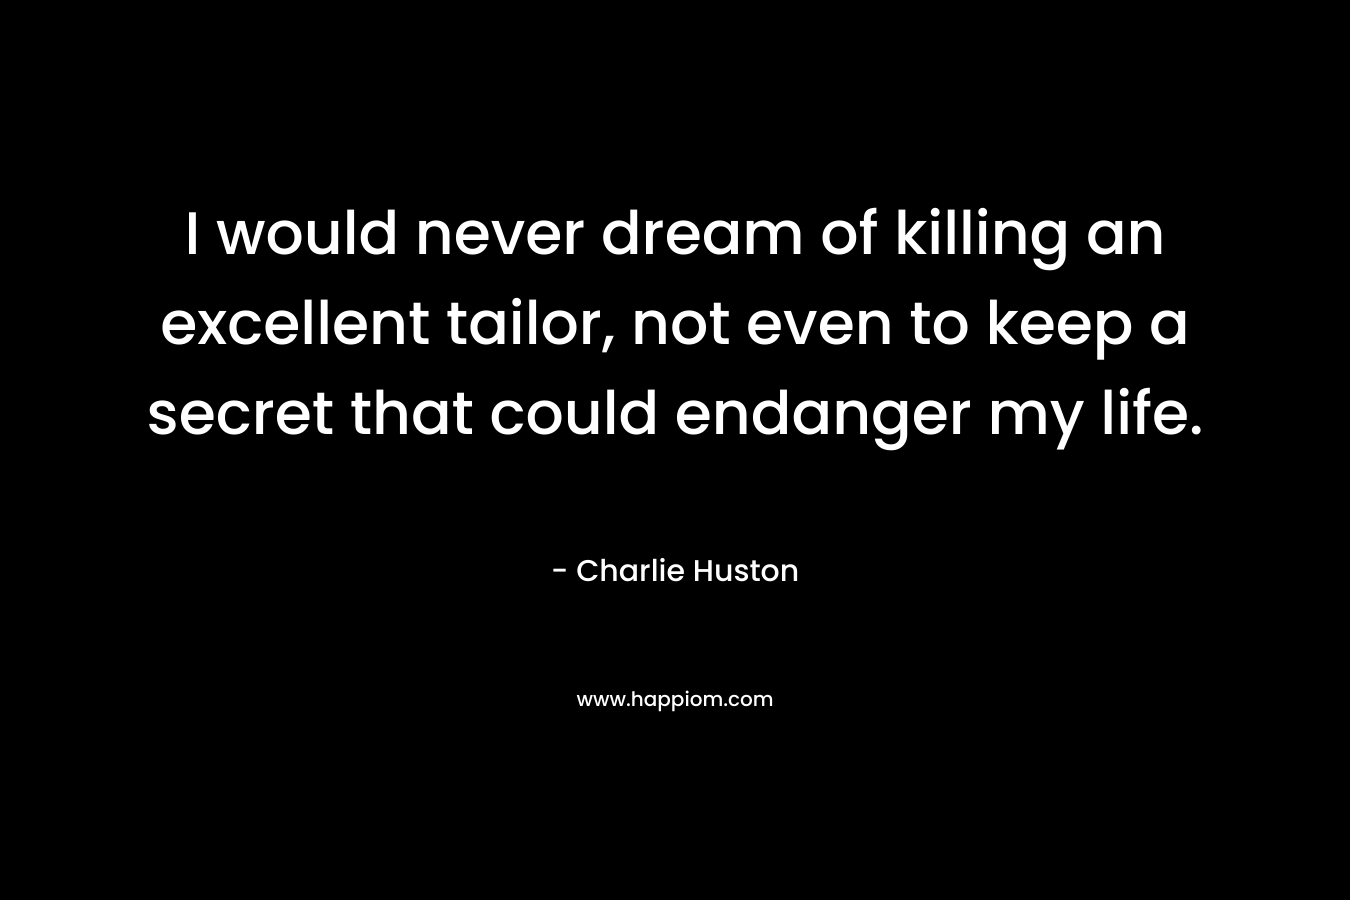 I would never dream of killing an excellent tailor, not even to keep a secret that could endanger my life.